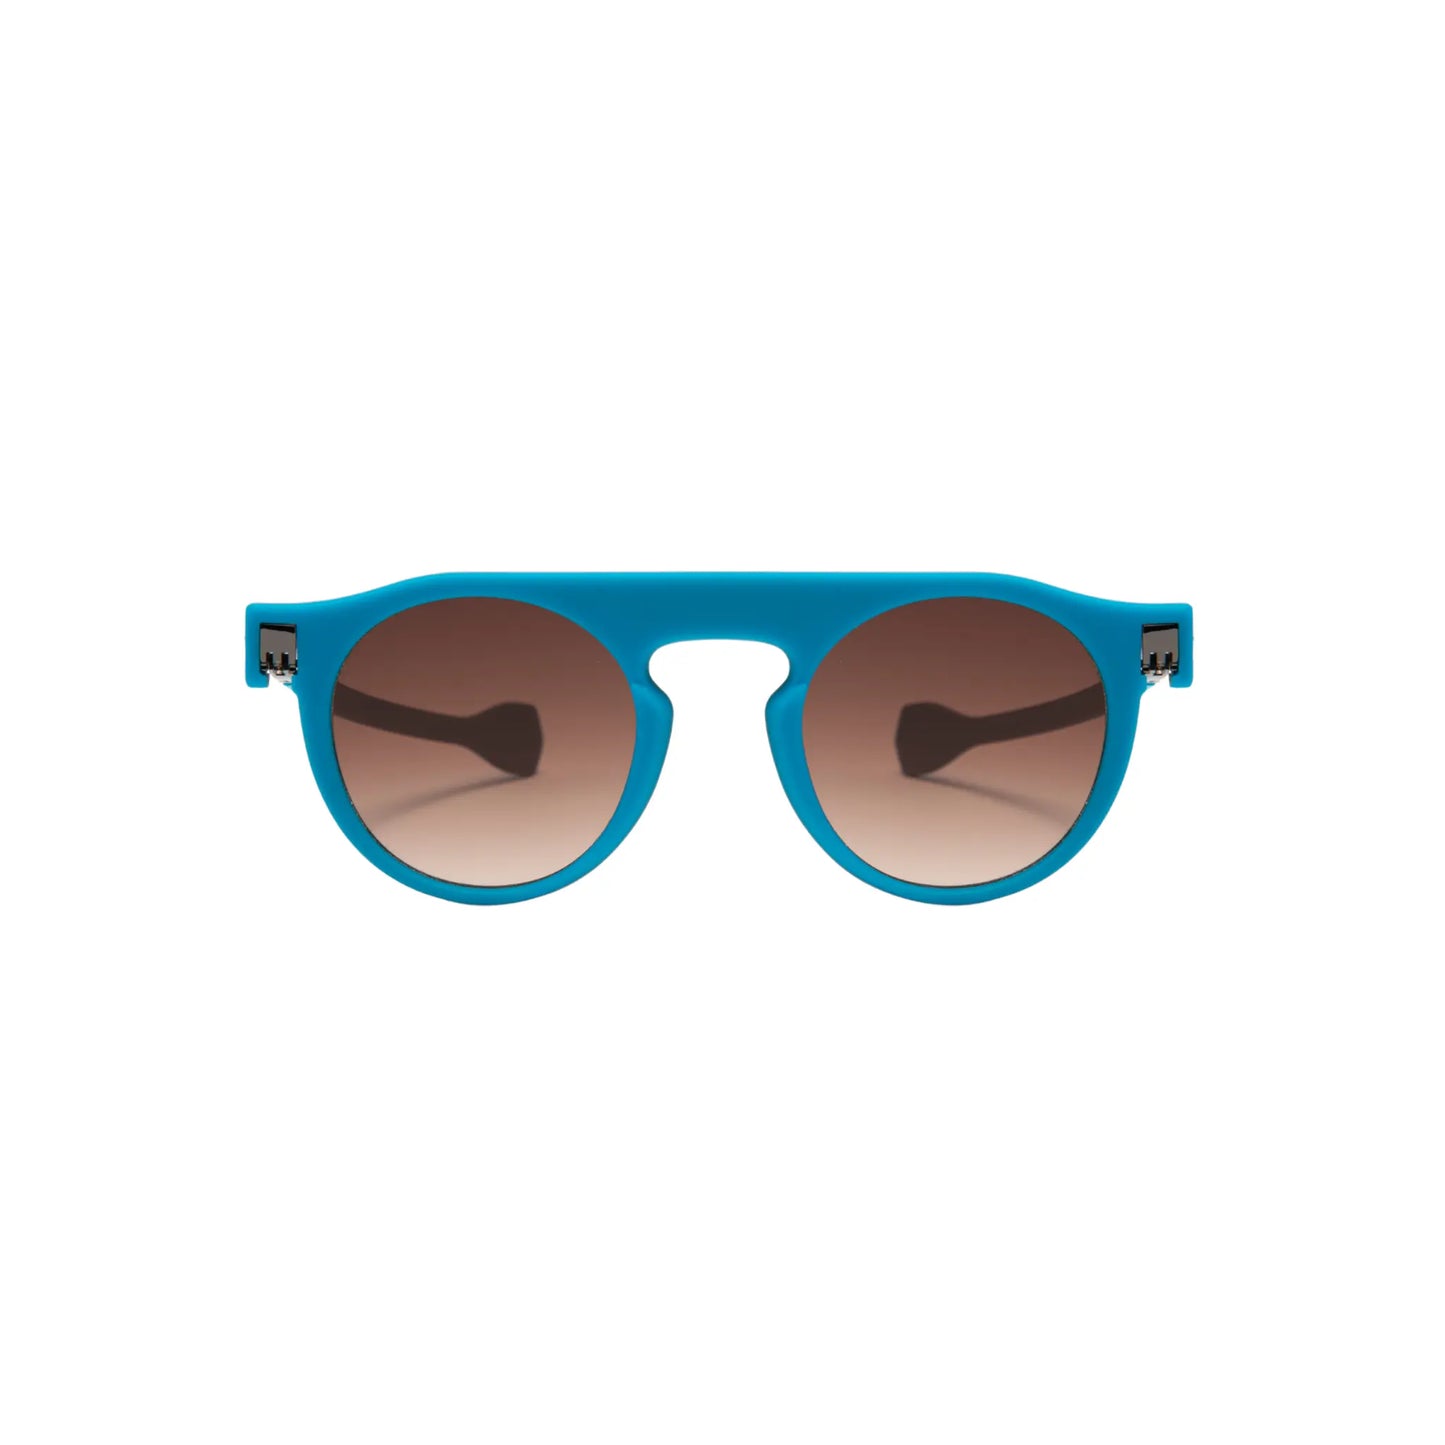 Reverso sunglasses mosaic blue & brown reversible & ultra light front view 2